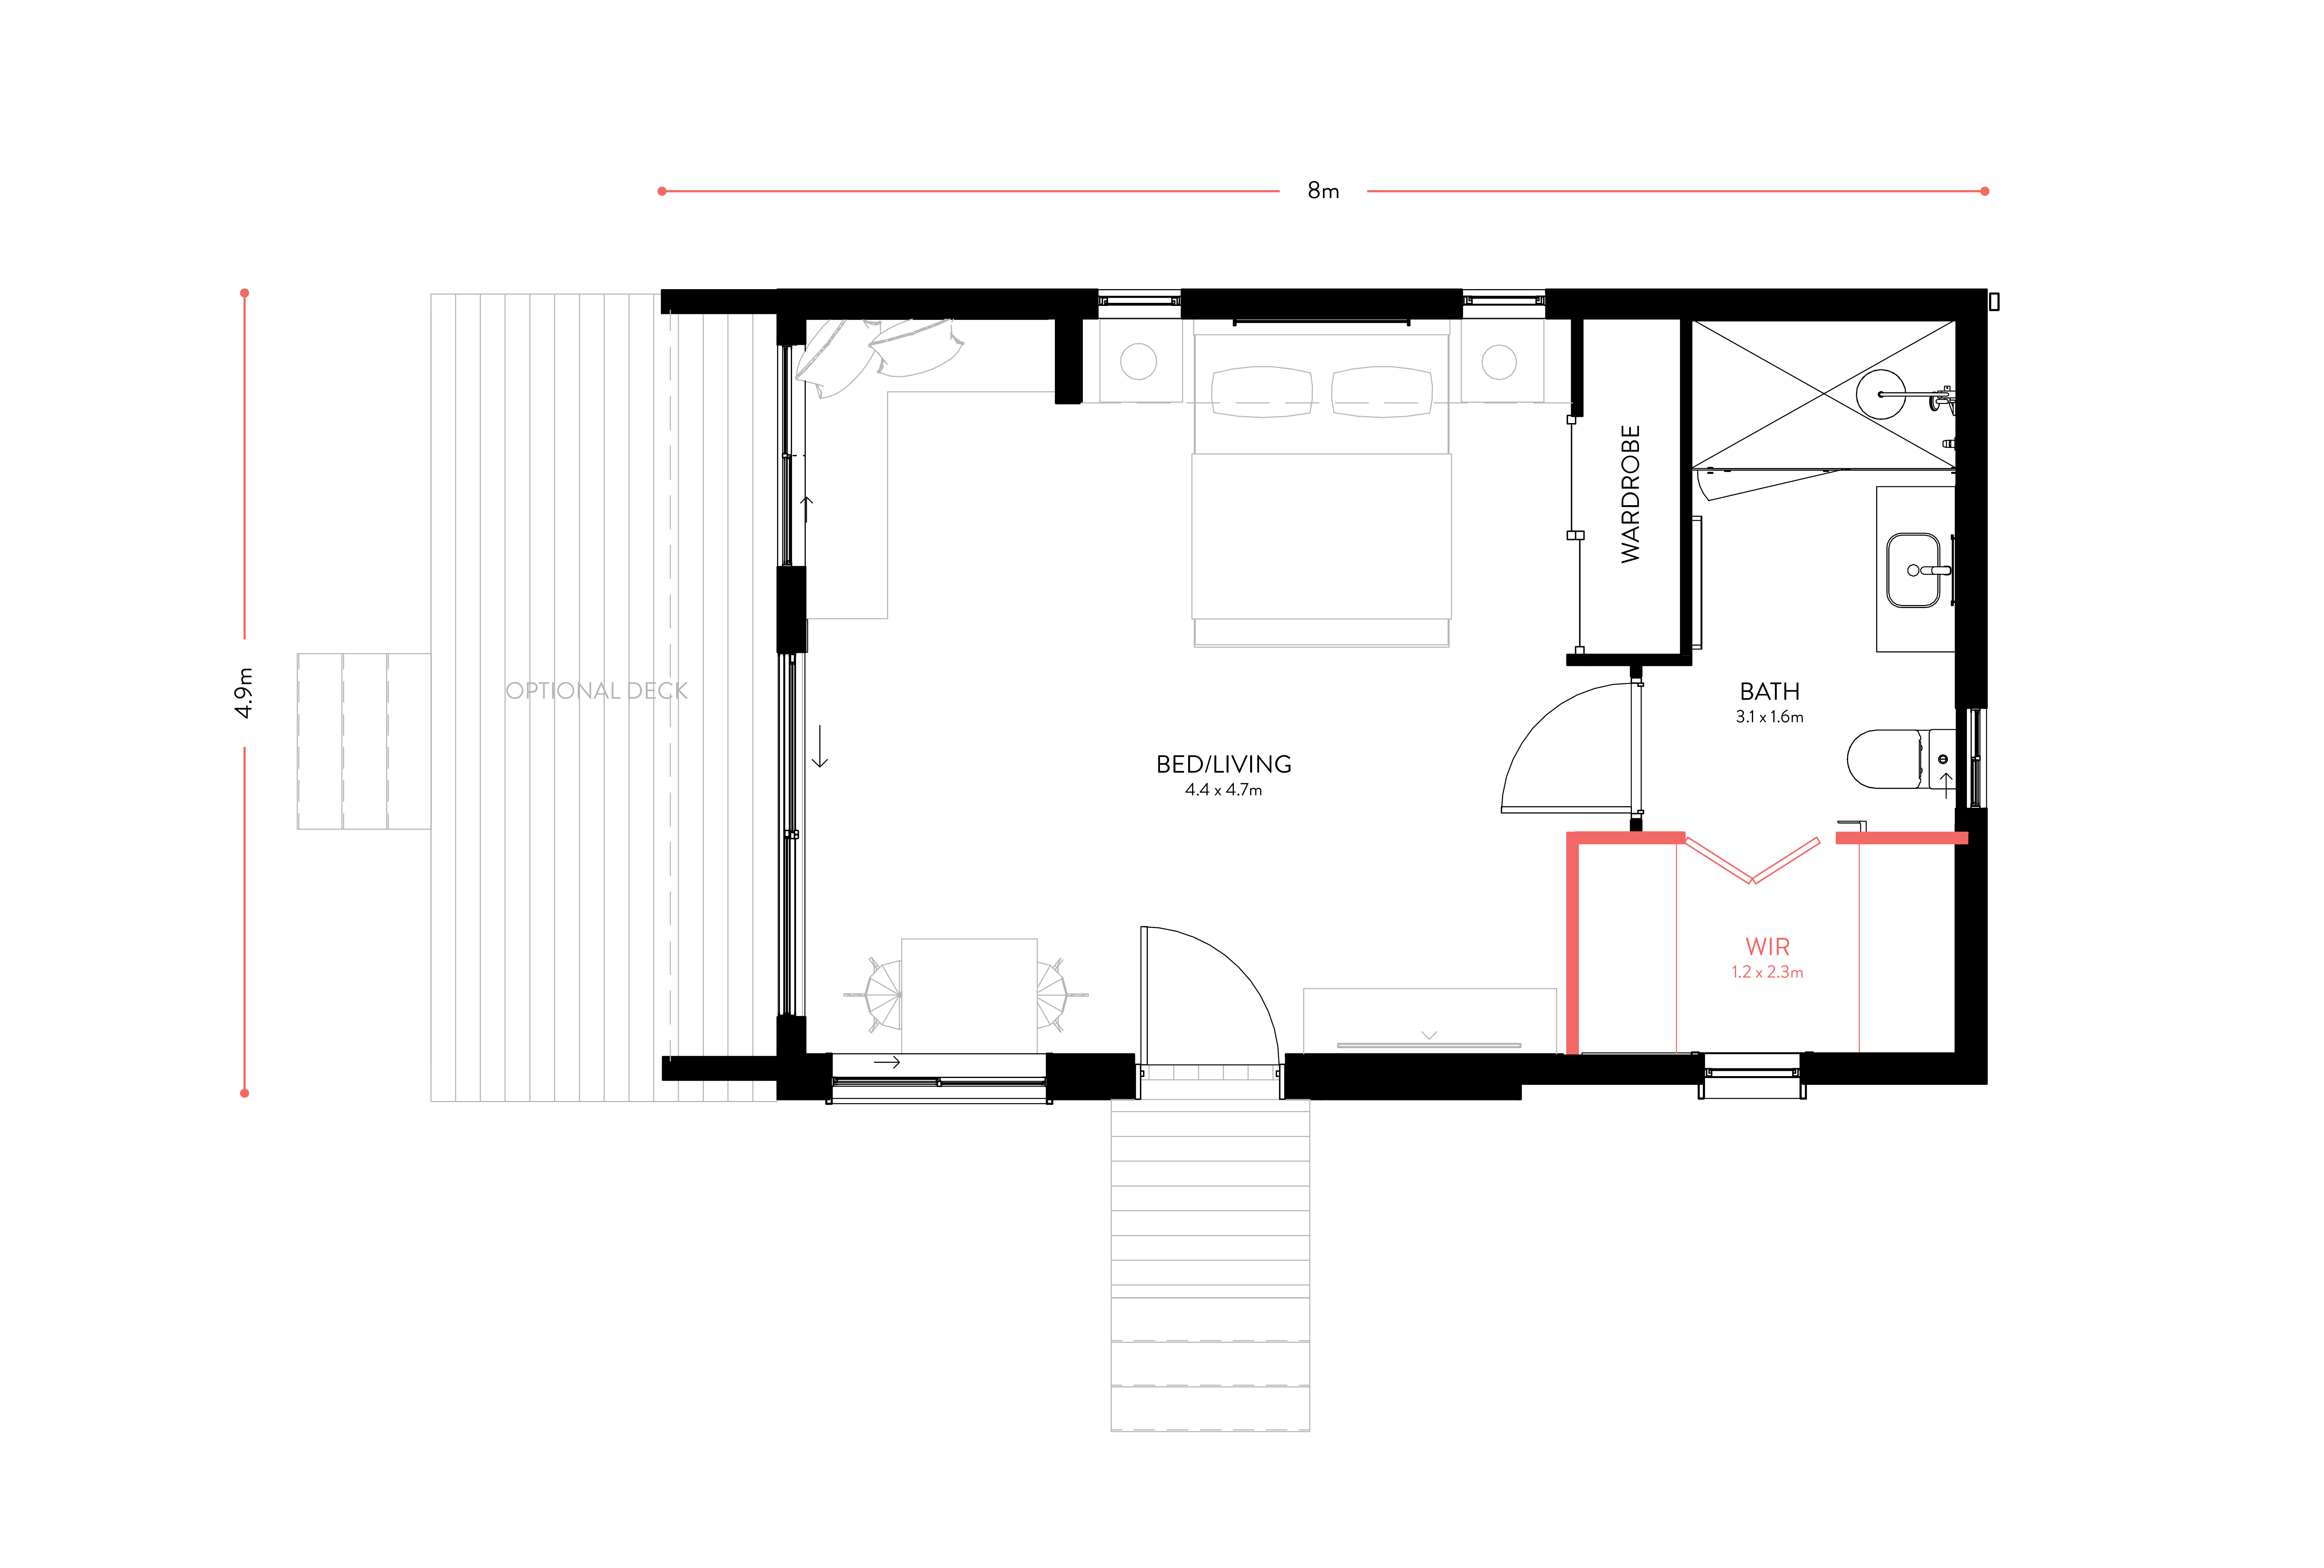 Floorplan of PLACEit modular home - Hobby with walk in robe